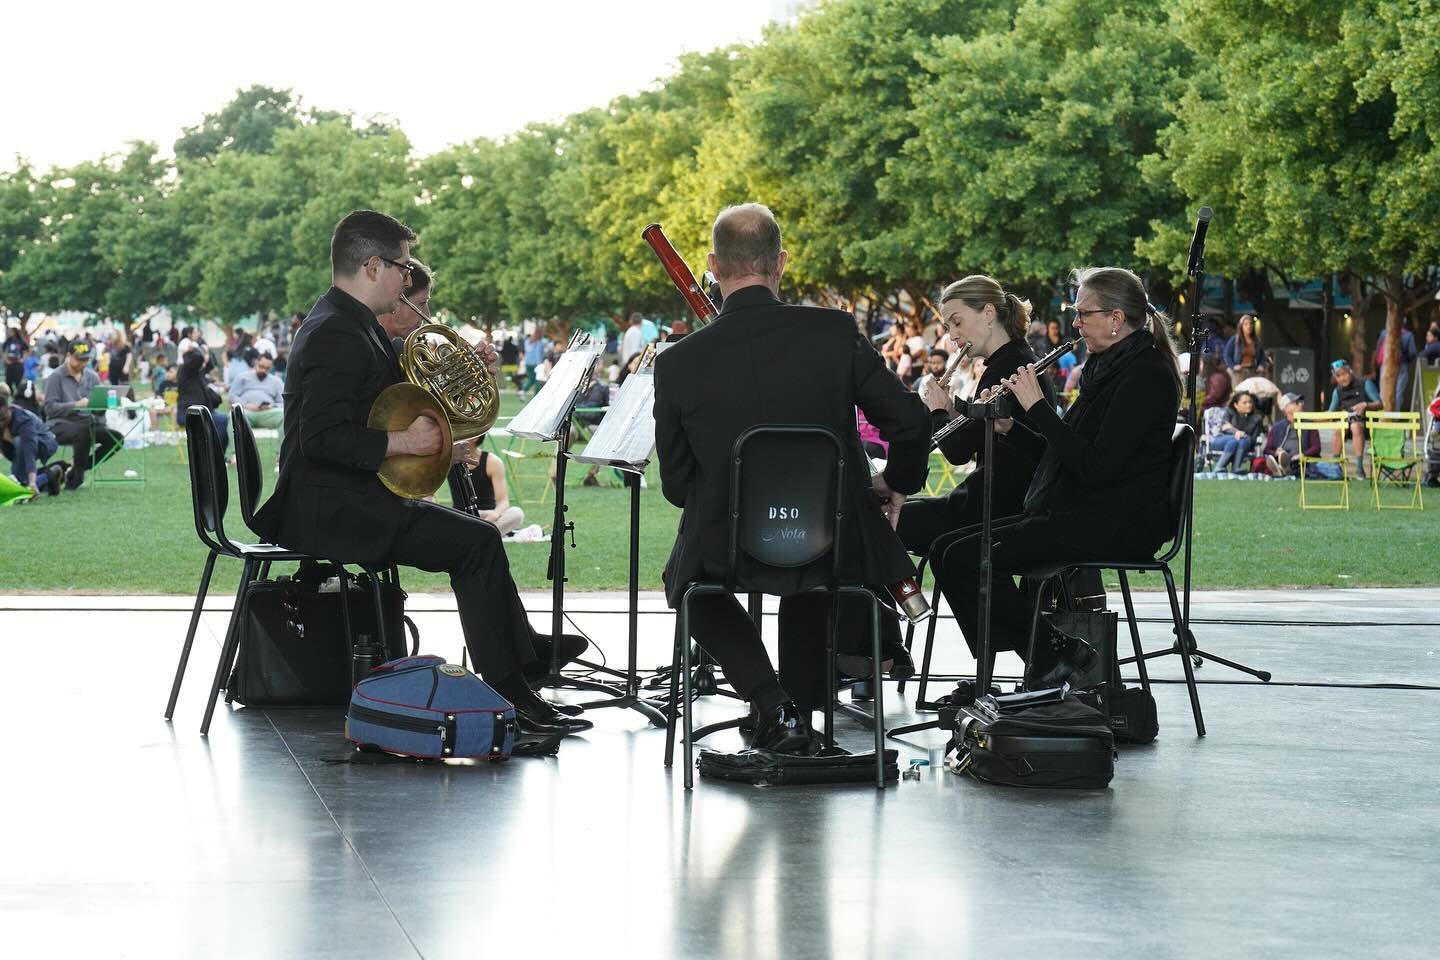 Symphony Sundays
Sunday, May 19
6-7 PM
FREE

The DSO is hitting all the right notes with Symphony Sundays. It&rsquo;s the perfect orchestration for a joyful end to any weekend. 🎶🎼🎵🎺🎻🎷🌳
.
.
.
.
.
.
#klydewarrenpark